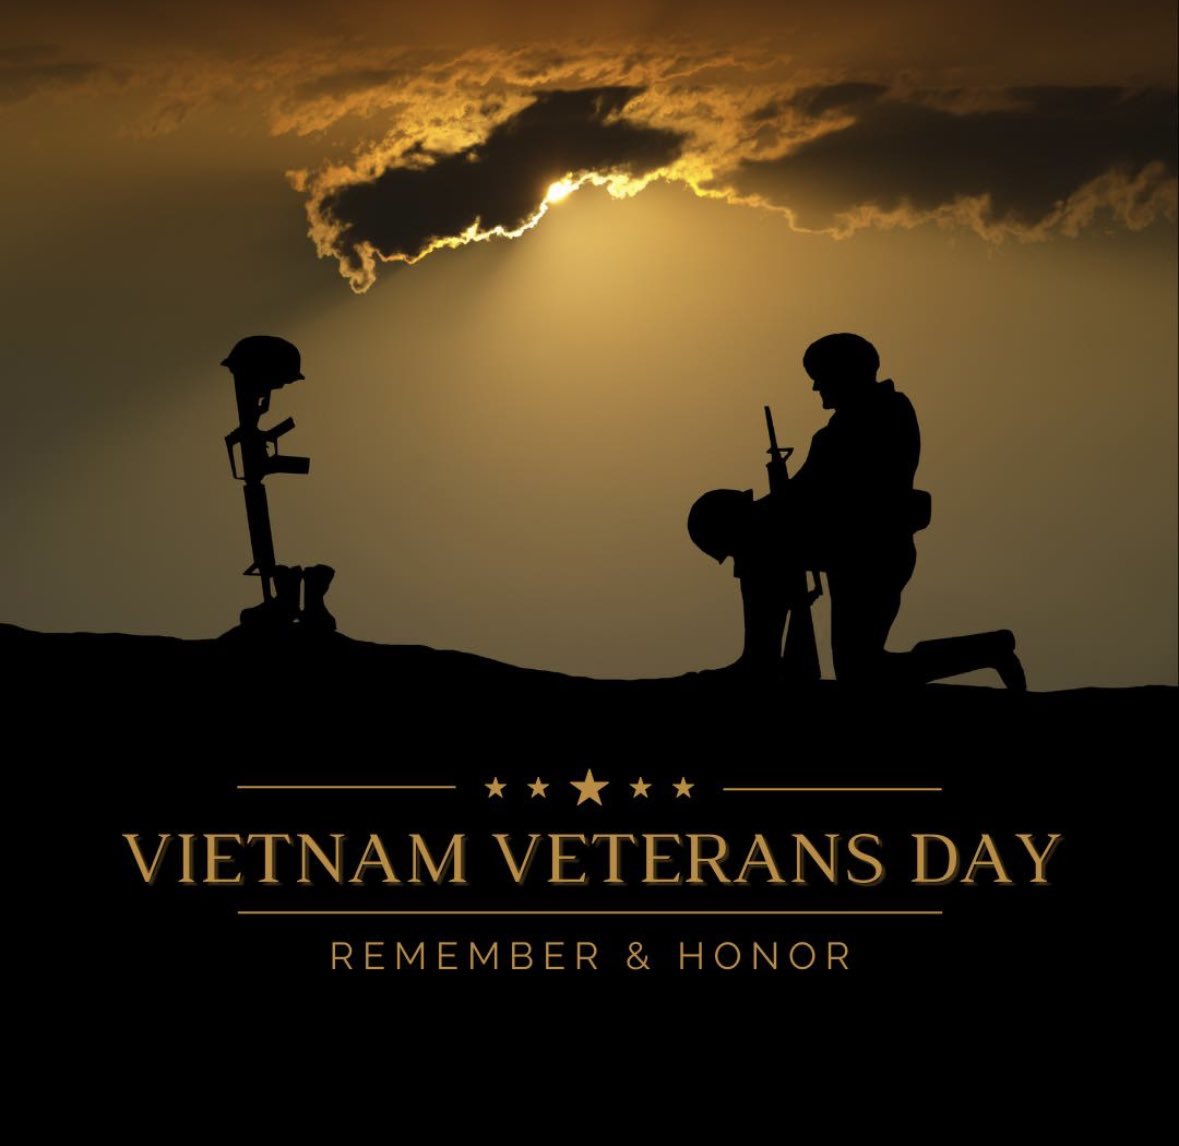 THP would like to take a moment to remember and honor all those who bravely served on this day- Vietnam Veterans Day. It's celebrated on March 29th, the day the last American troops left Vietnam. #USA #vietnamvets #rememberandhonor